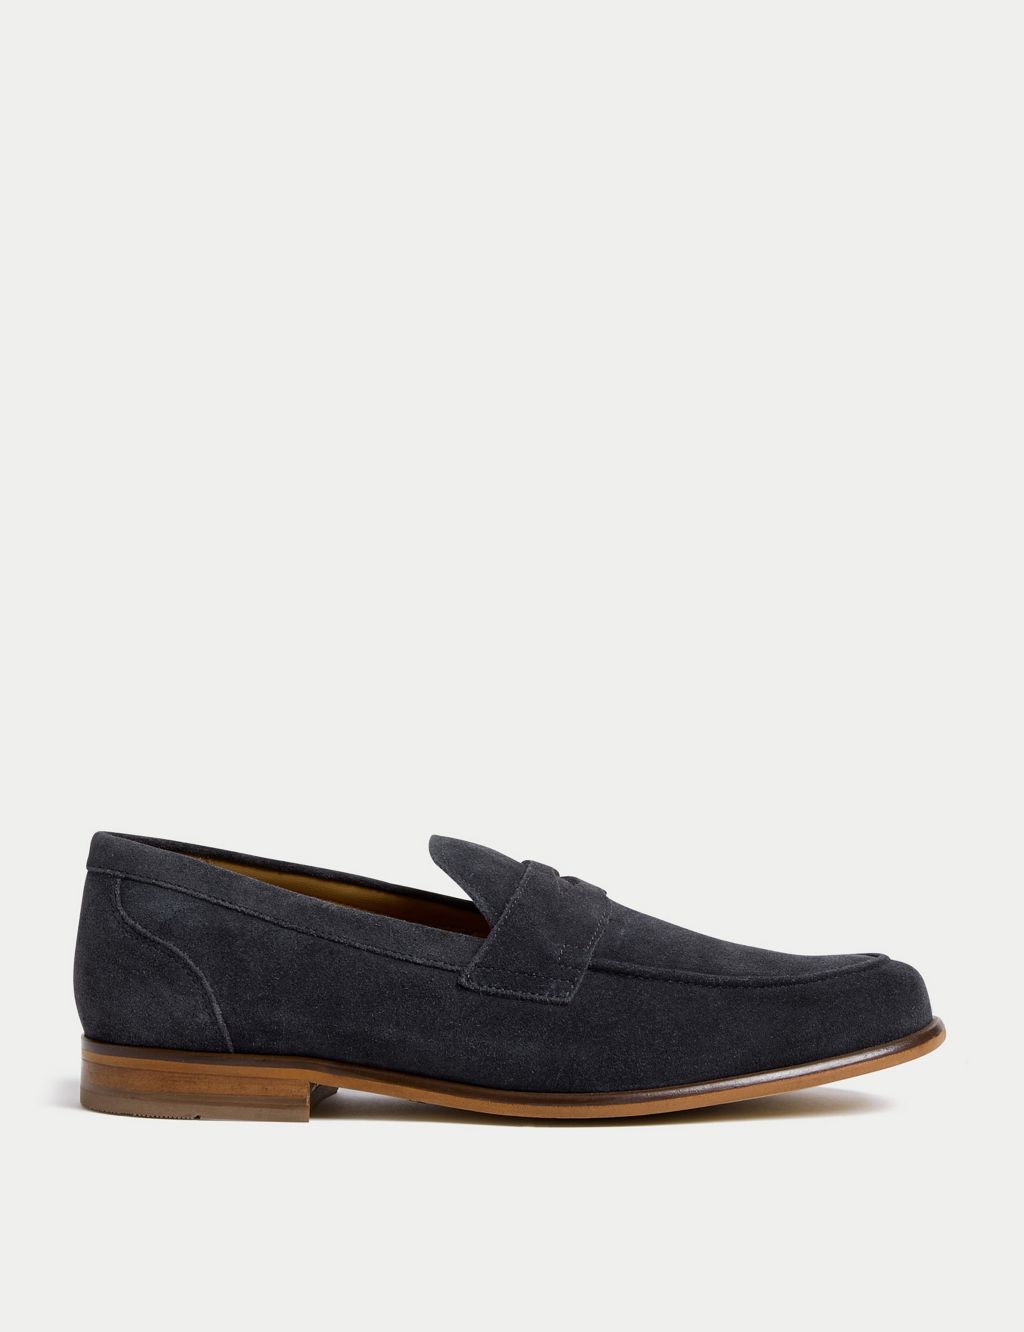 Suede Slip-On Loafers image 1